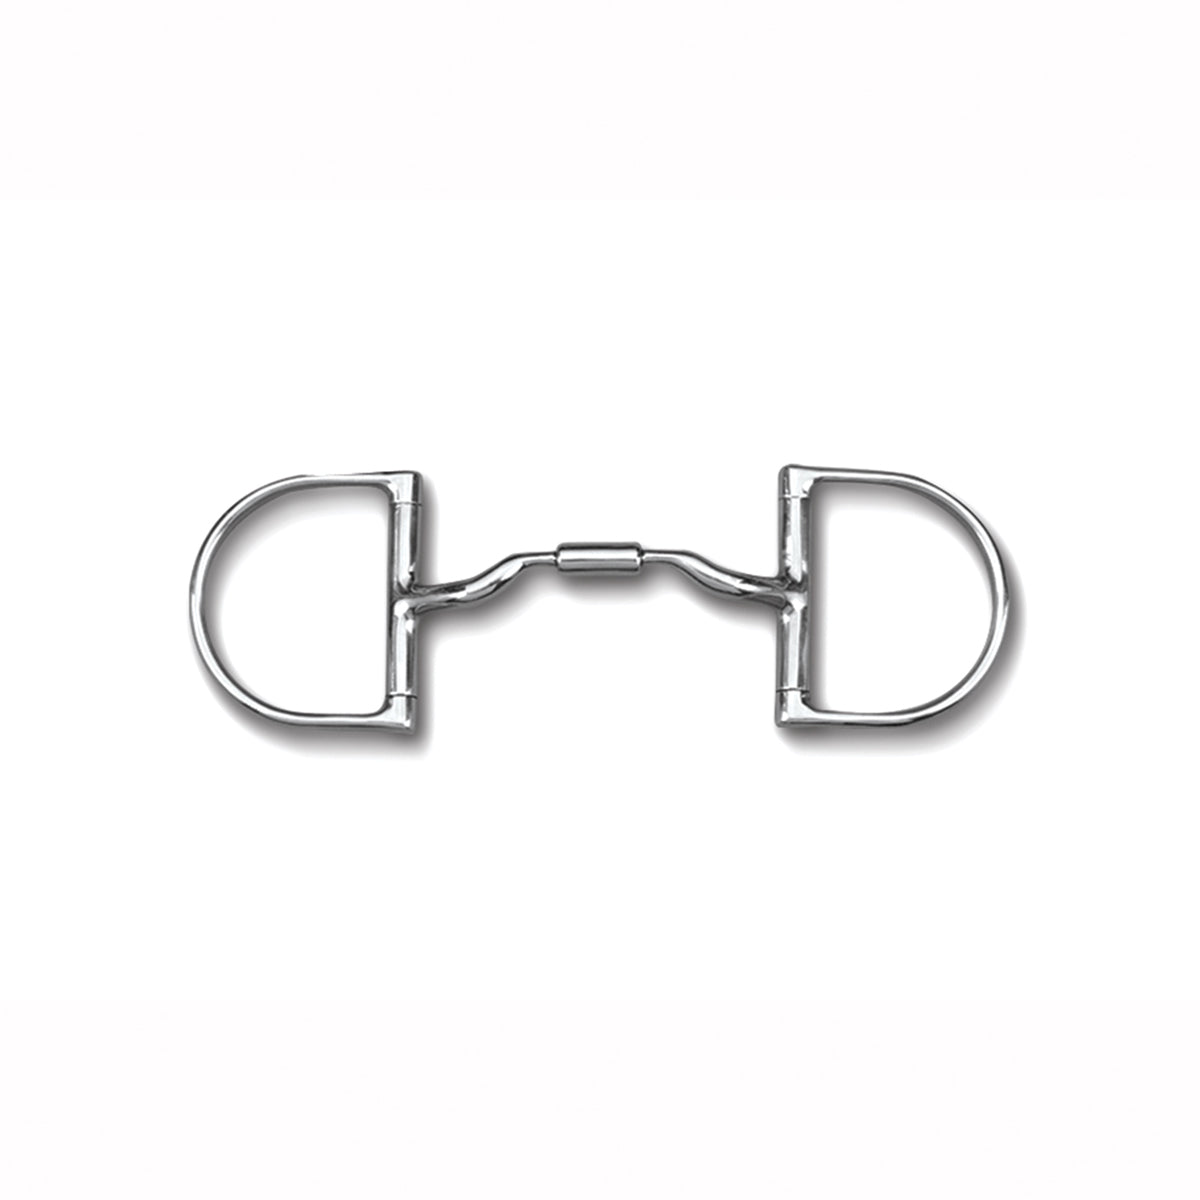 Toklat Myler 3 3/8" Medium Dee without Hooks with Low Port Comfort Snaffle MB 04